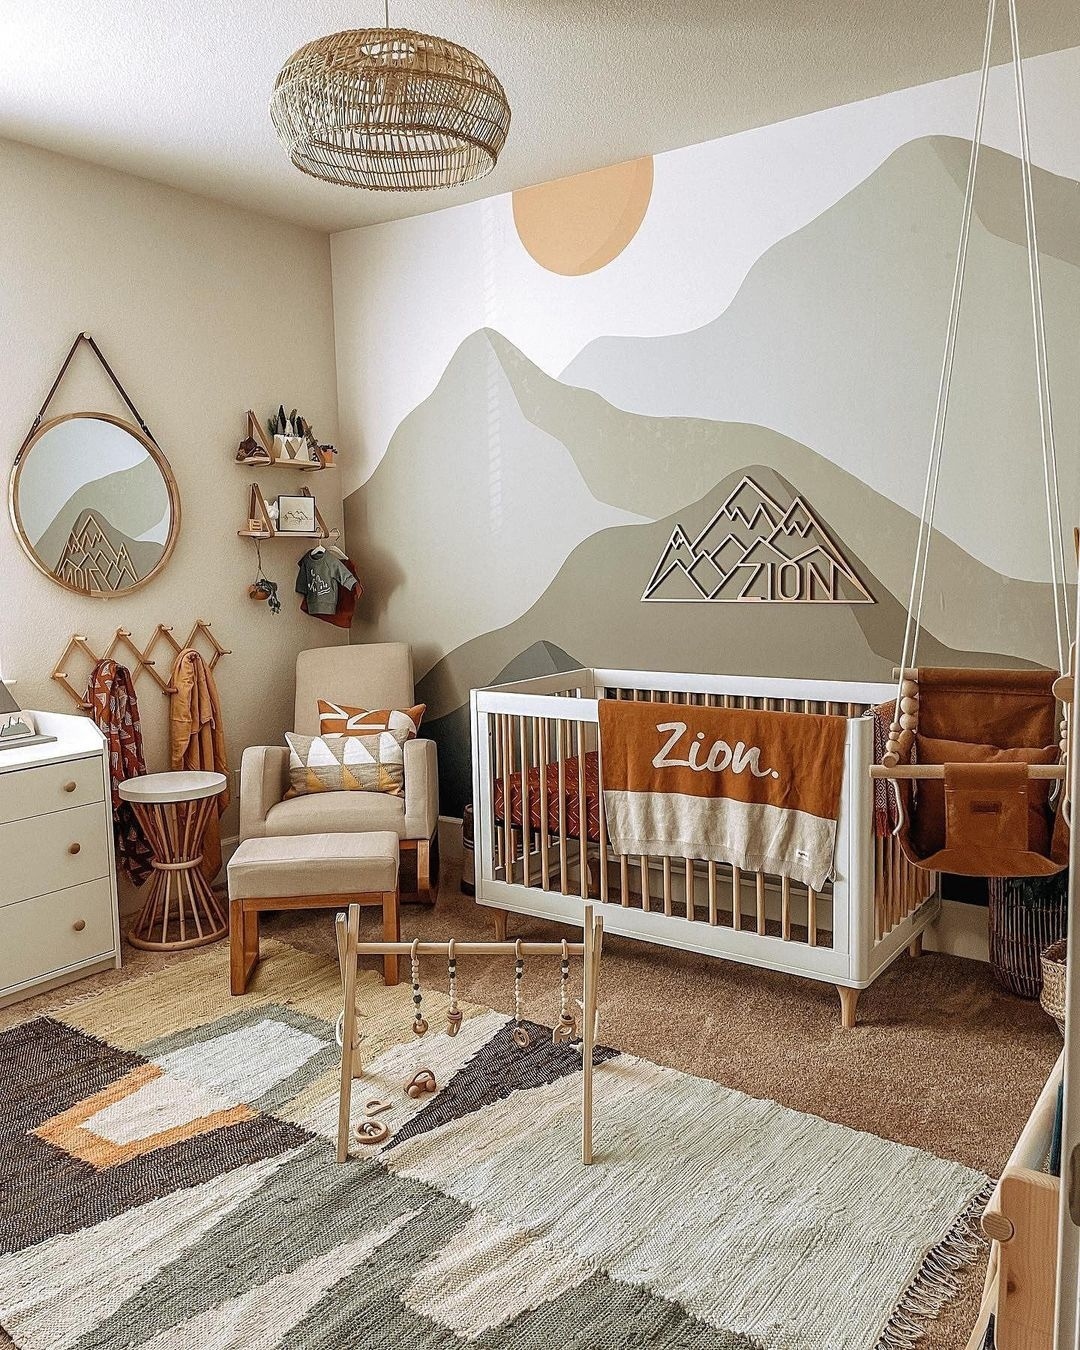 A sage green nursery with a mountain mural on the wall.